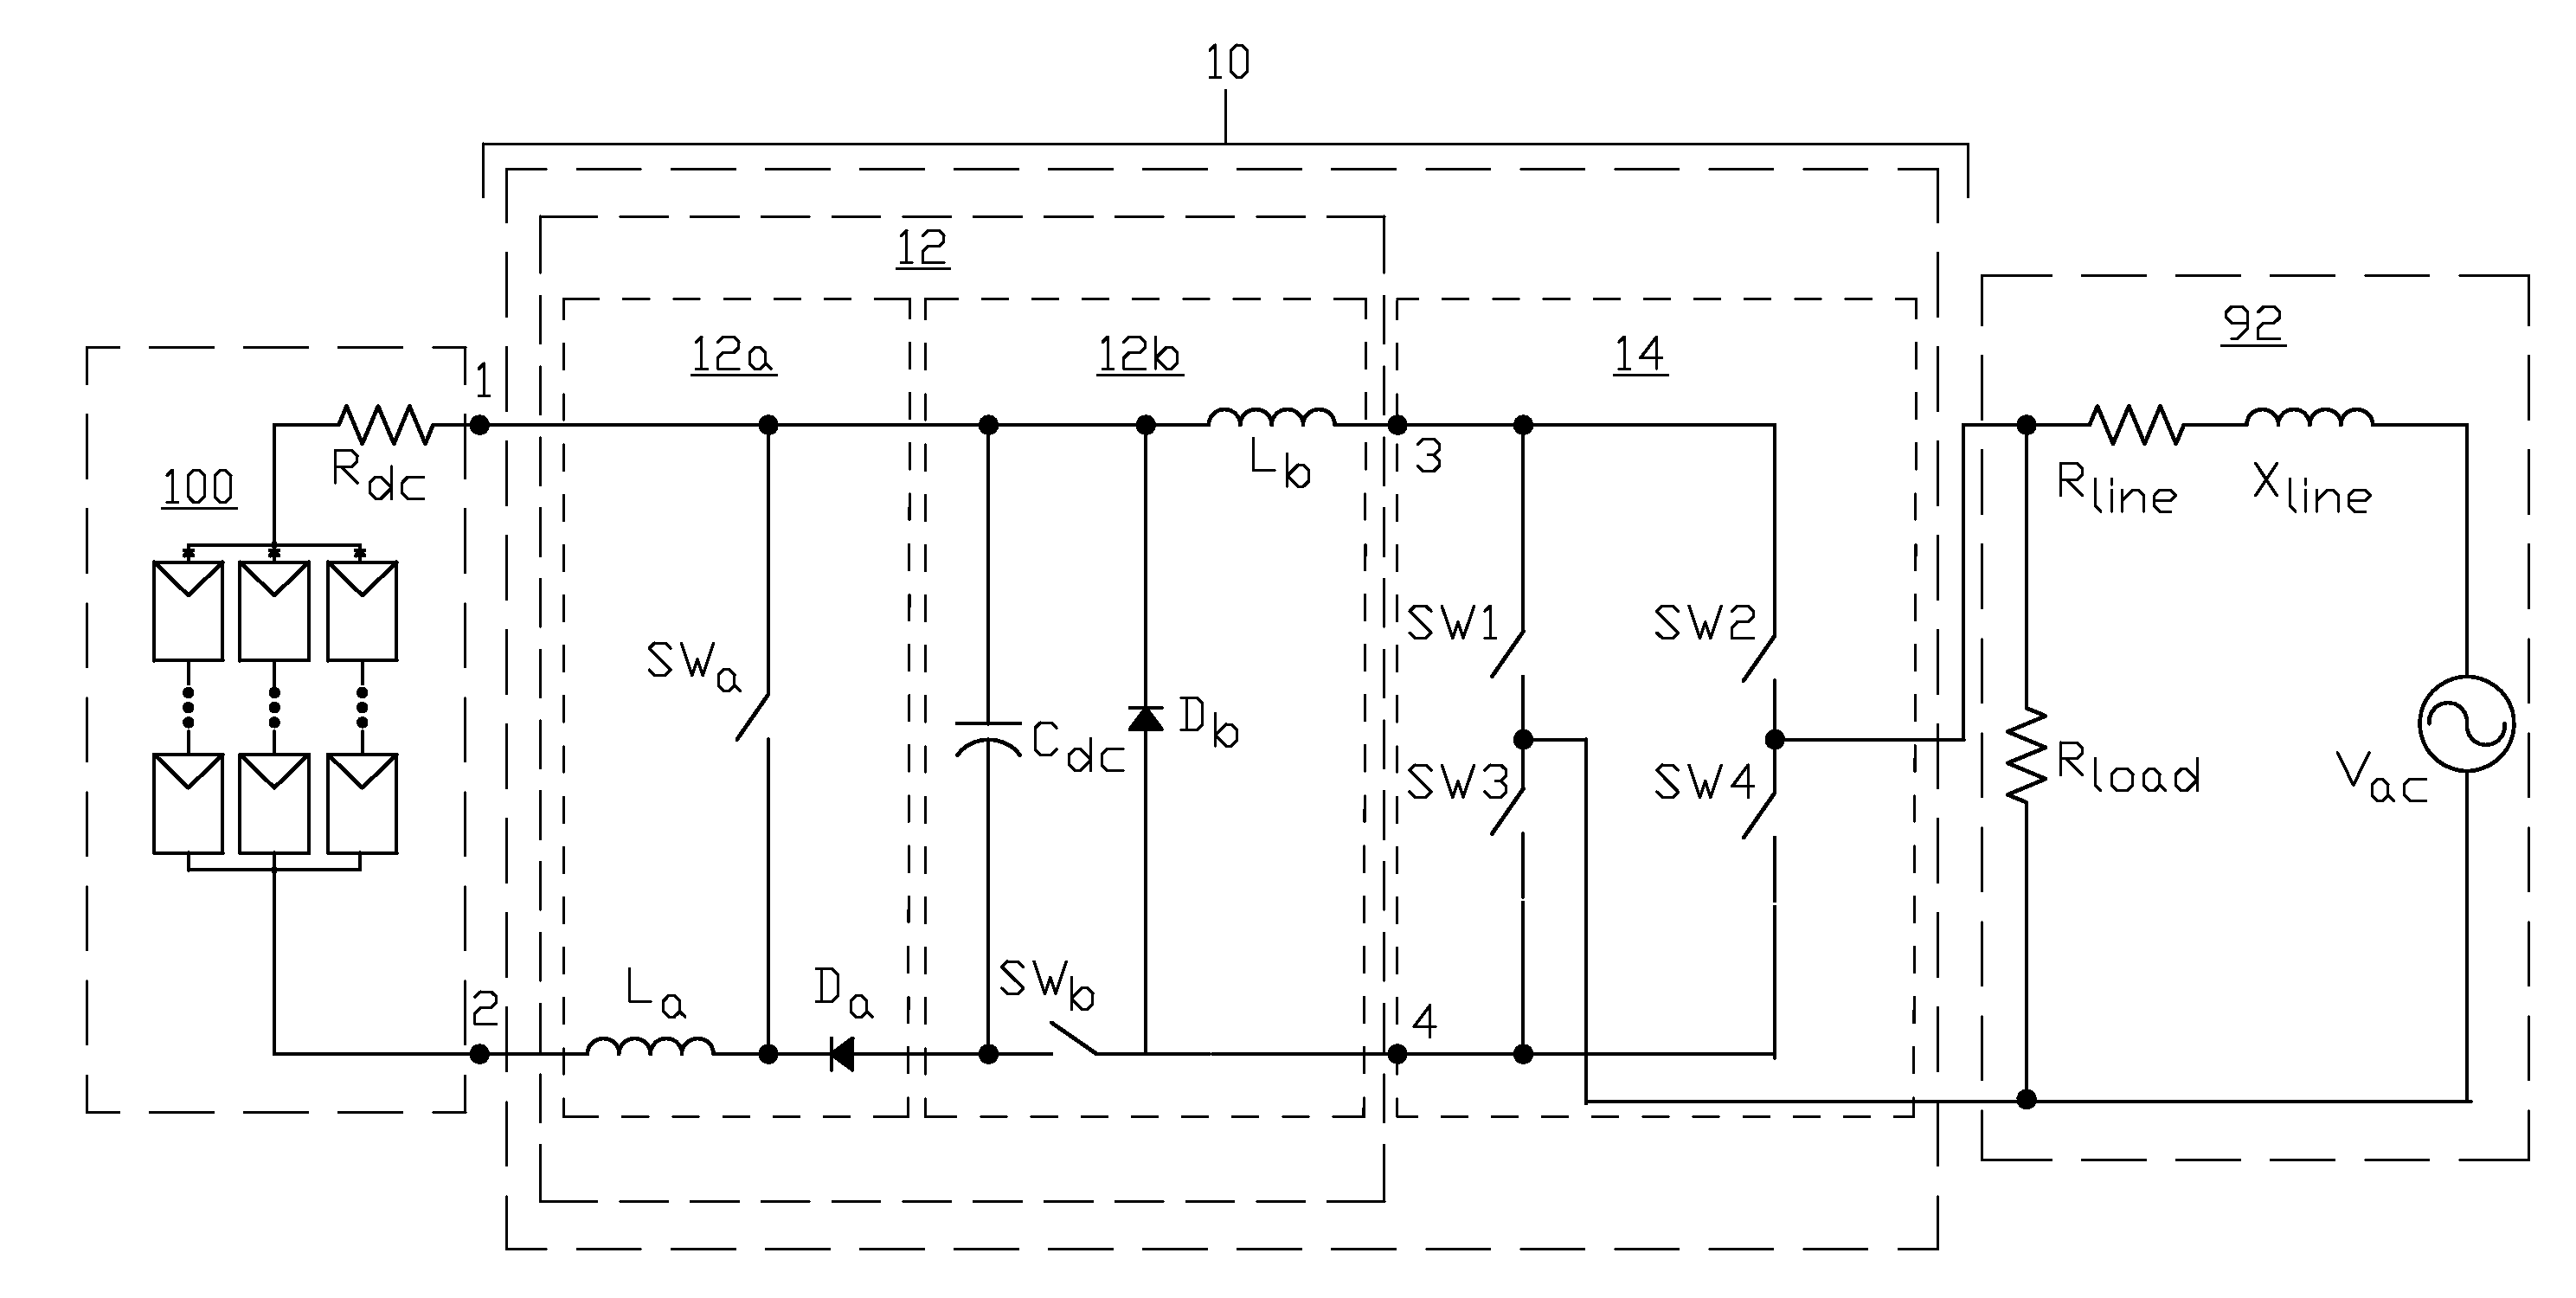 Multiphase grid synchronized regulated current source inverter systems